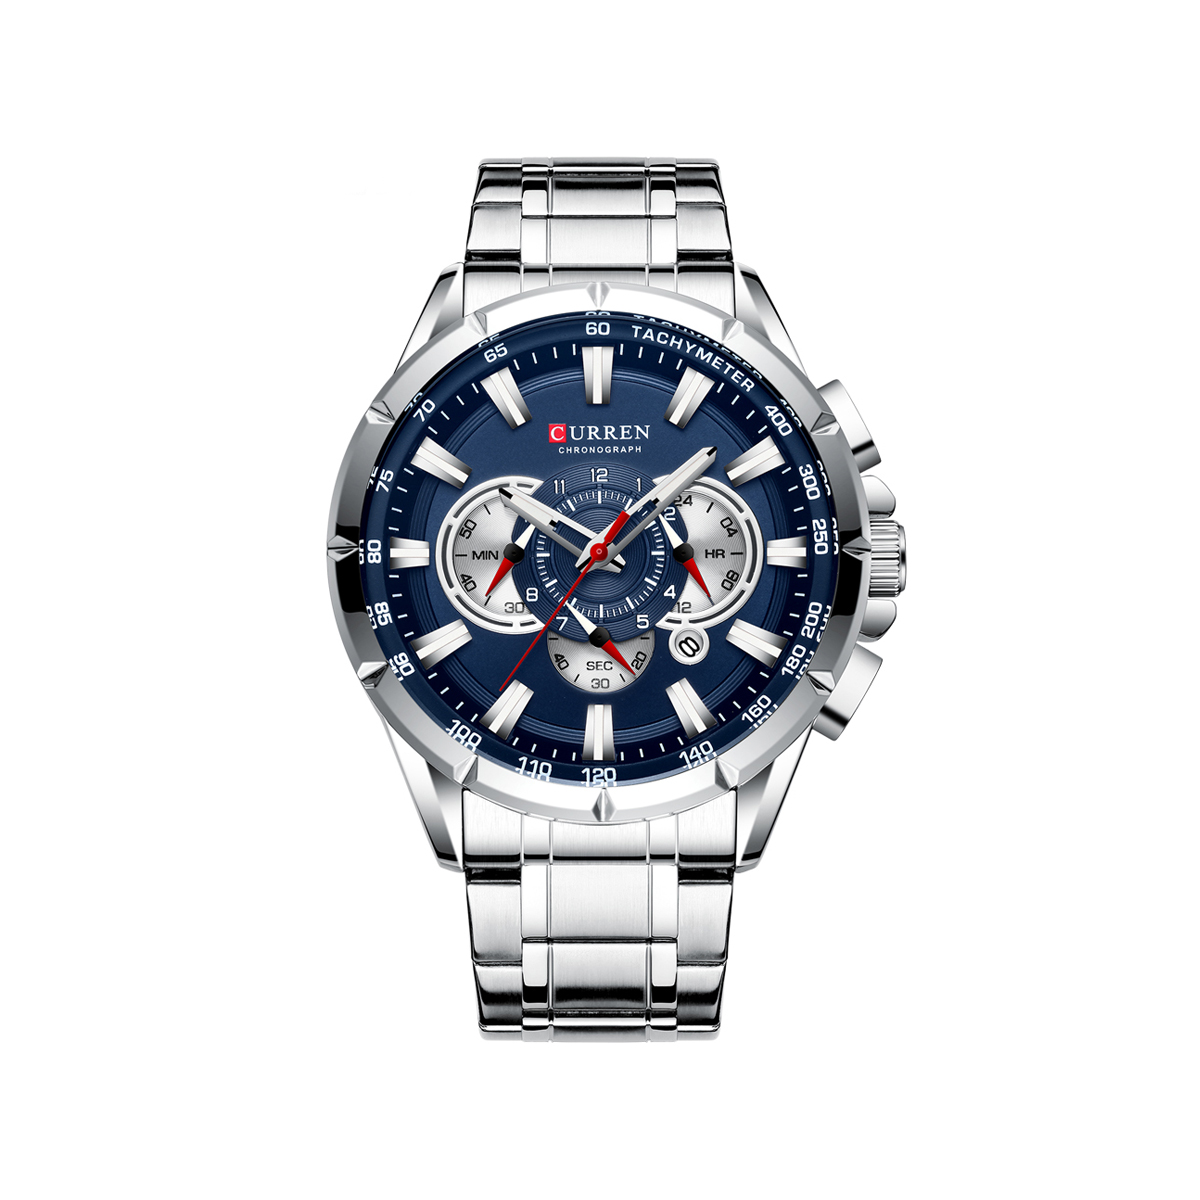 CURREN 8363 Chronograph Watch for Men – Silver & Blue